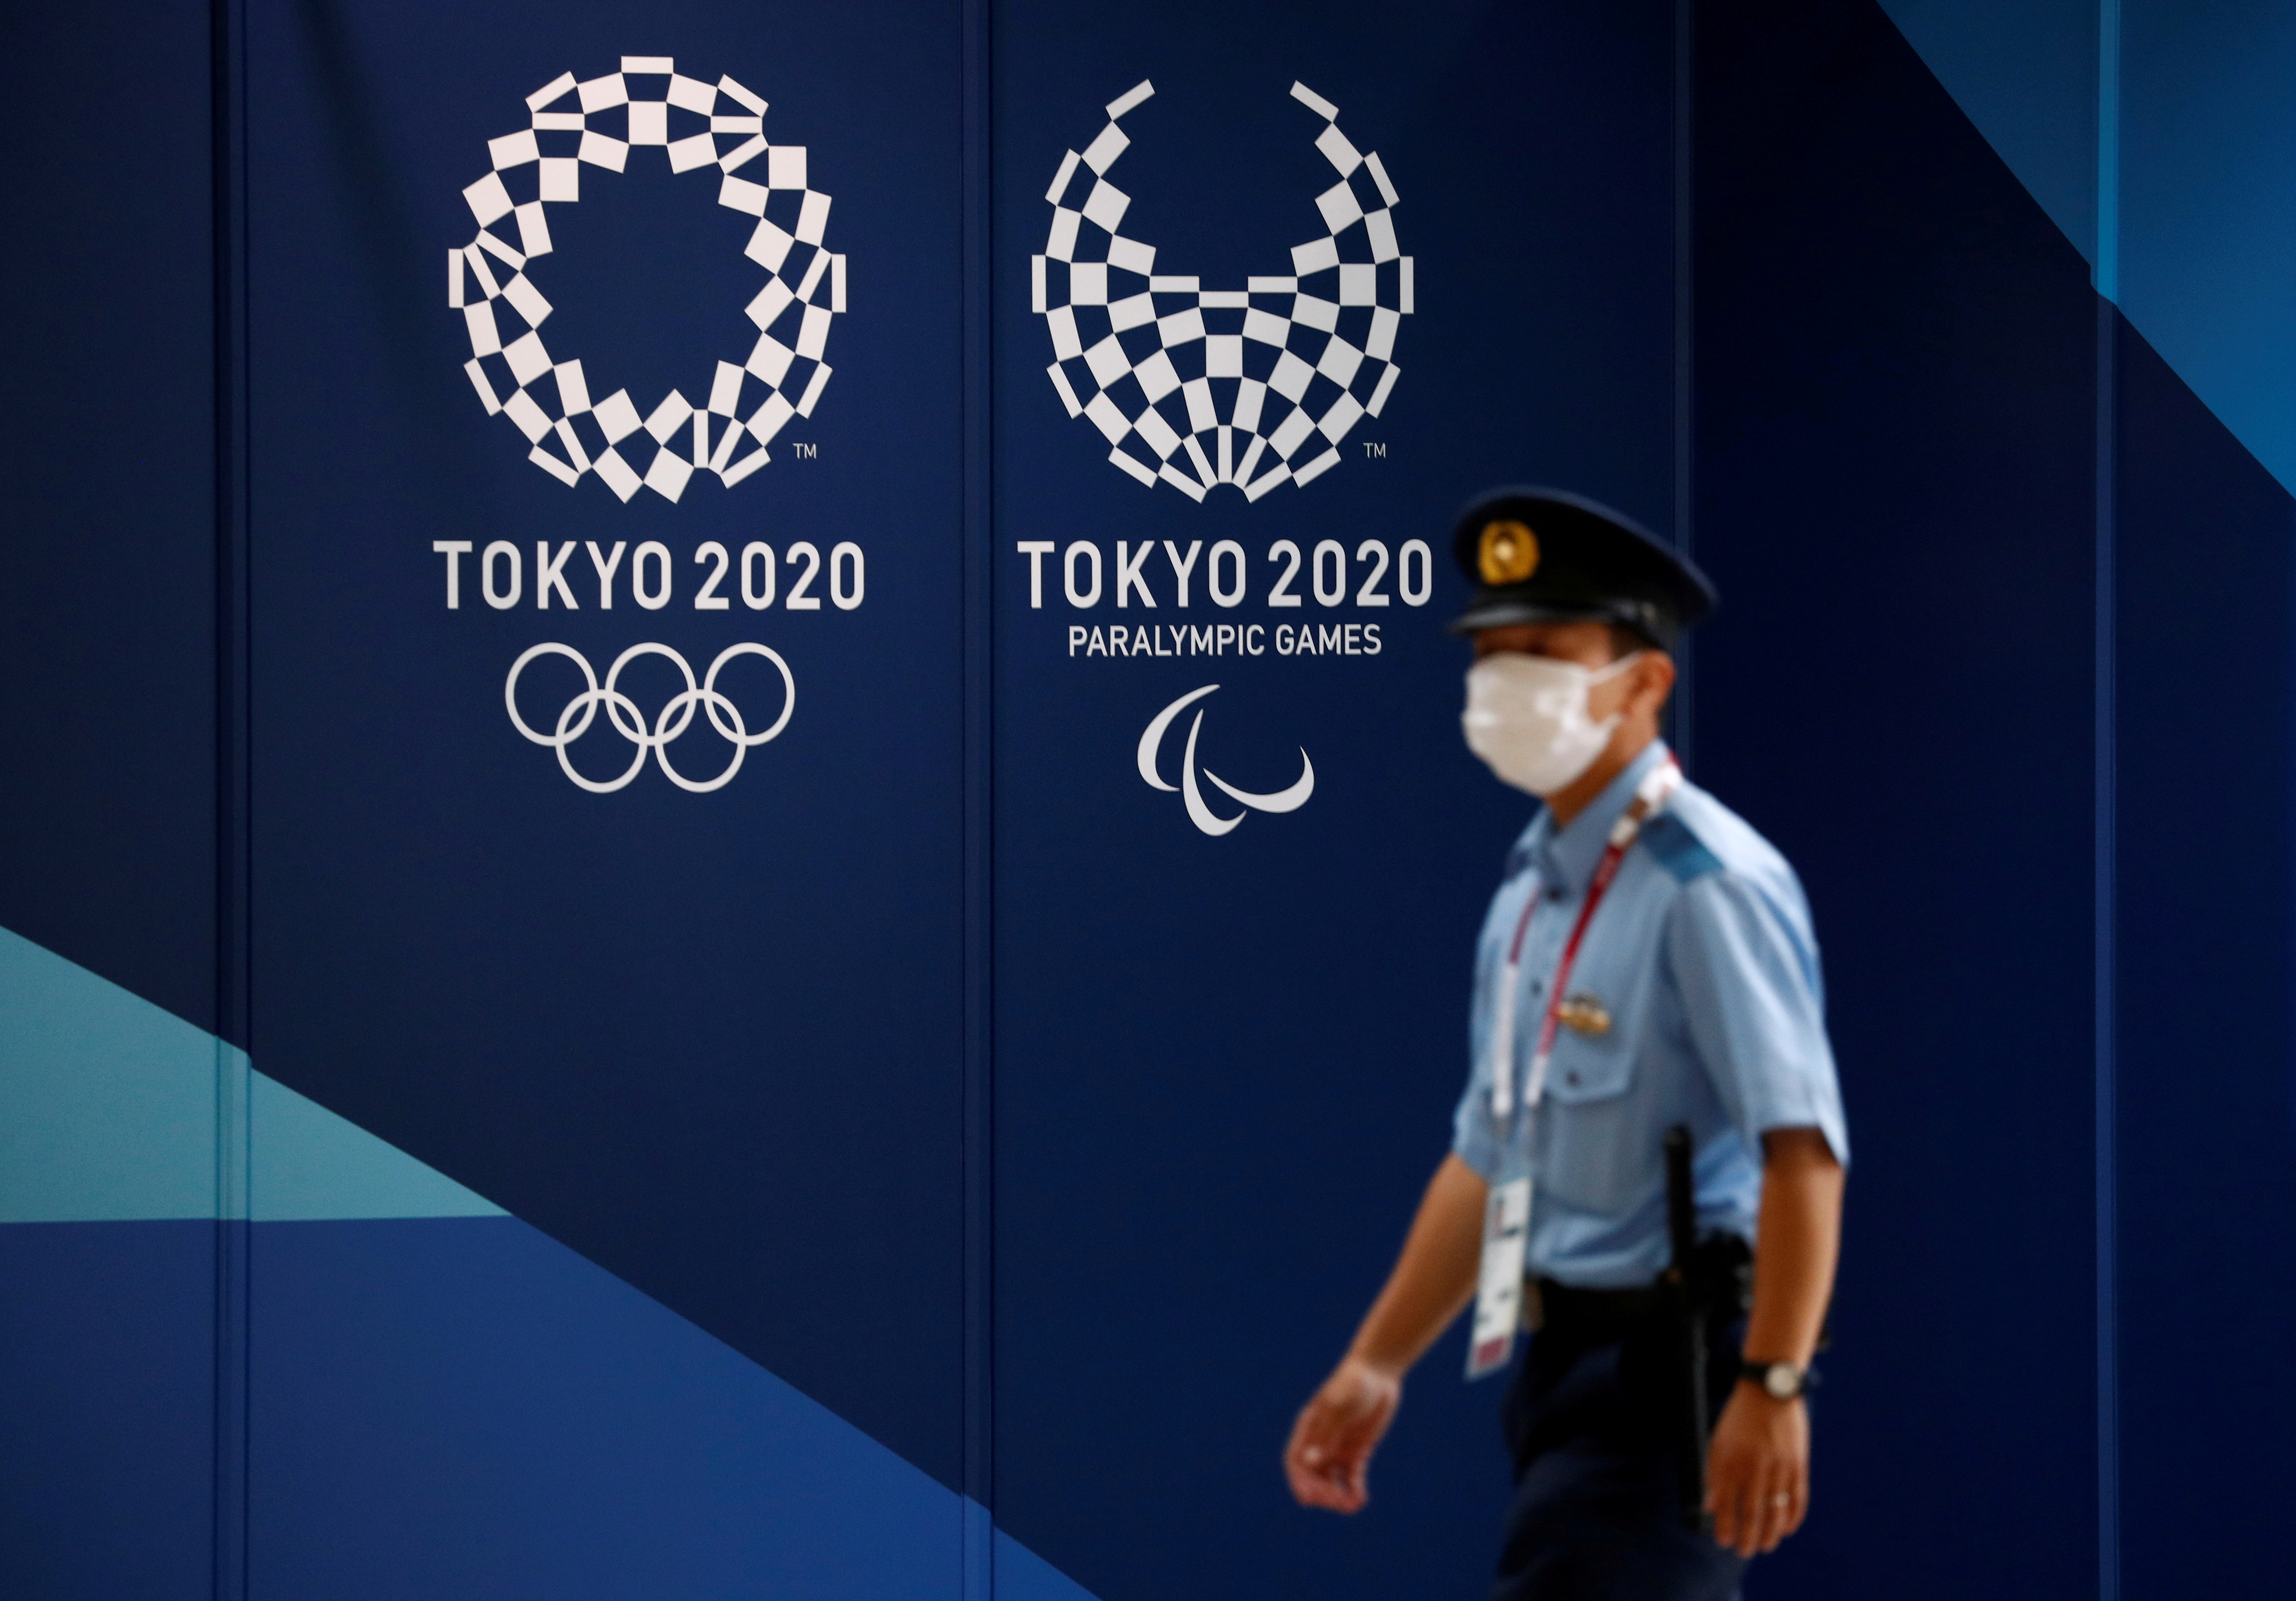 A policeman walks past Tokyo 2020 Olympic signage at the Main Press Center in Tokyo